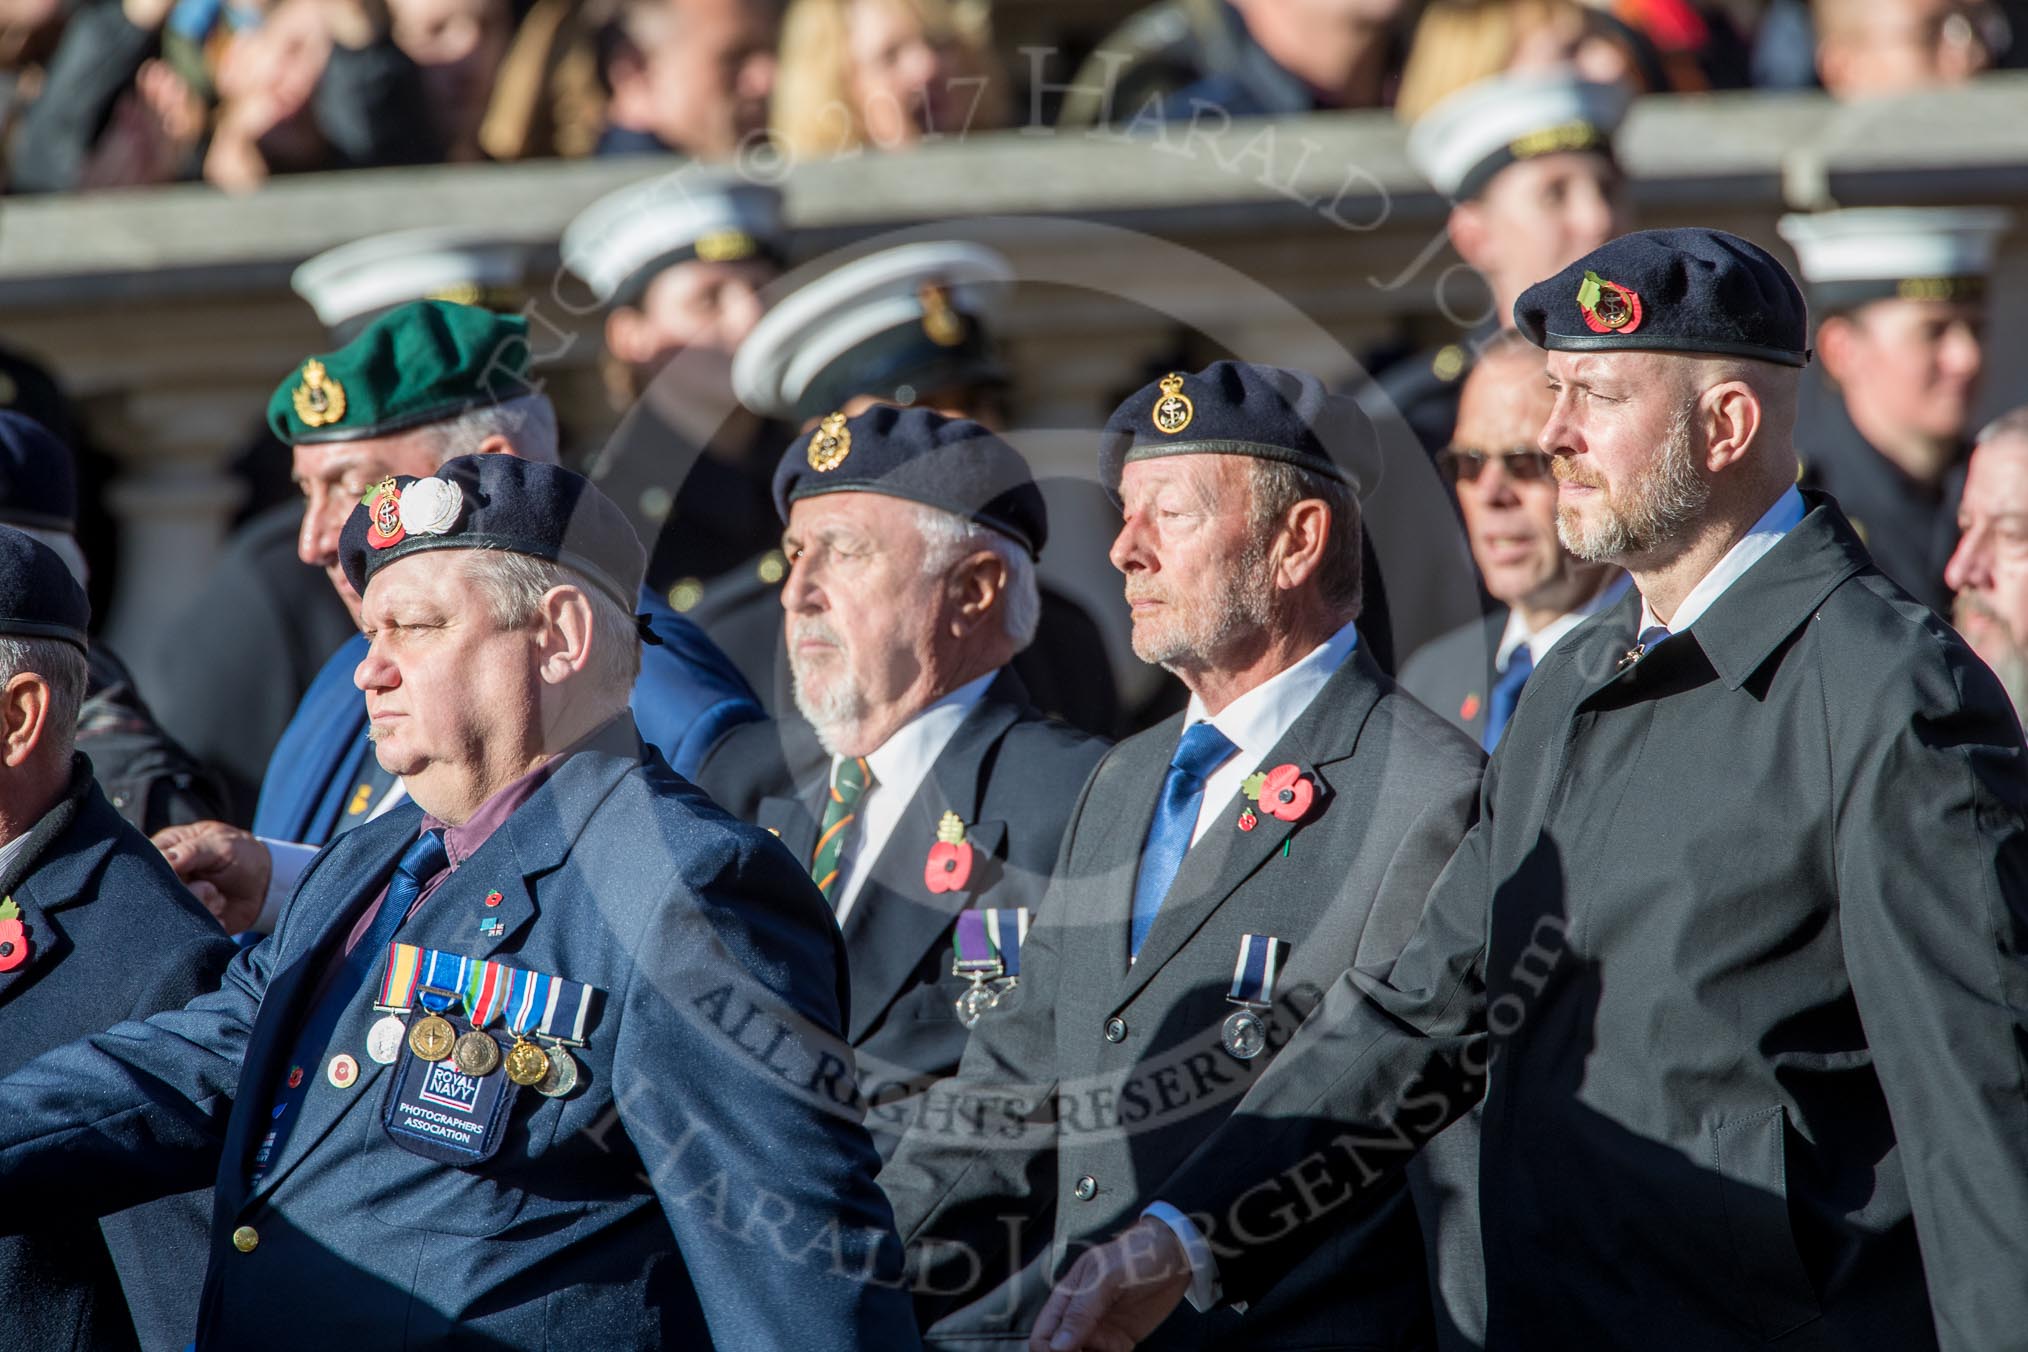 Royal Navy Photographers Association  (Part of the Fly Navy Federation conti (Group E13, 23 members) during the Royal British Legion March Past on Remembrance Sunday at the Cenotaph, Whitehall, Westminster, London, 11 November 2018, 11:43.